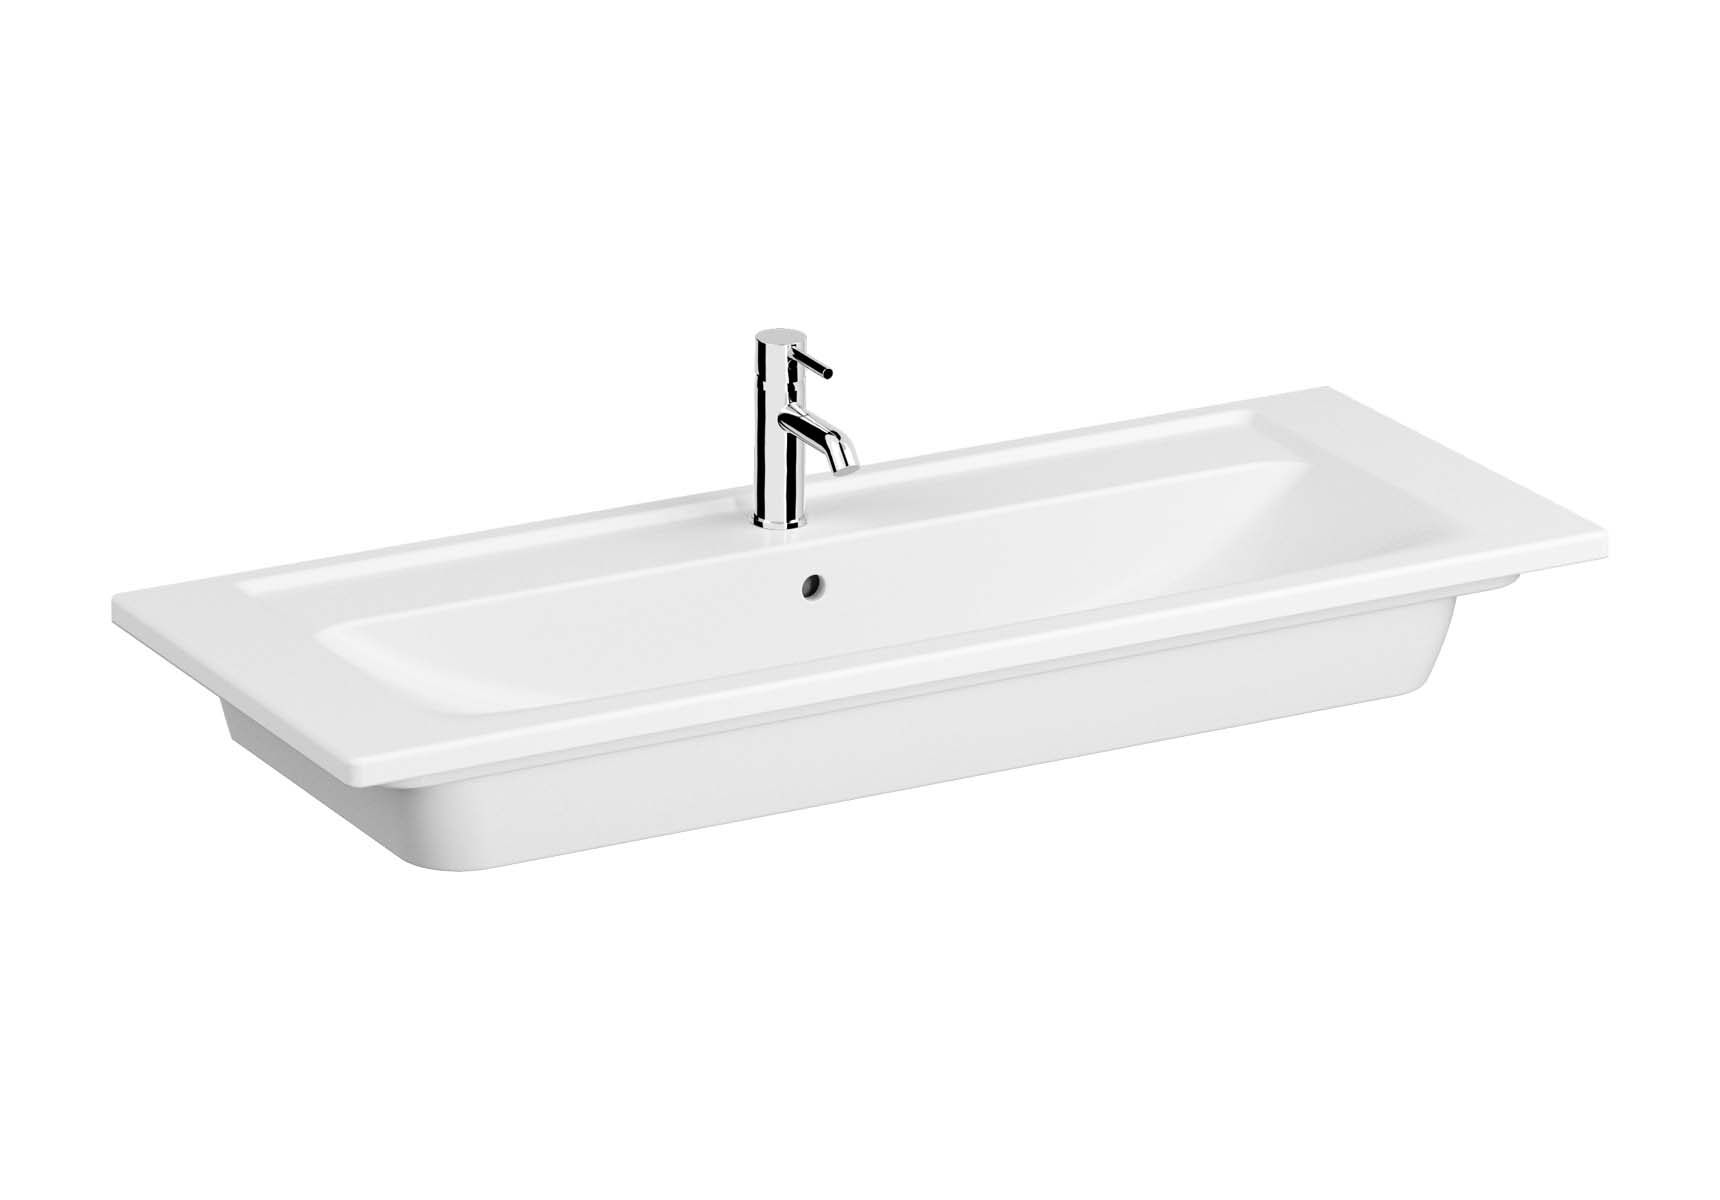 Vanity Basin, 120 cm, One Tap Hole, With Overflow Hole